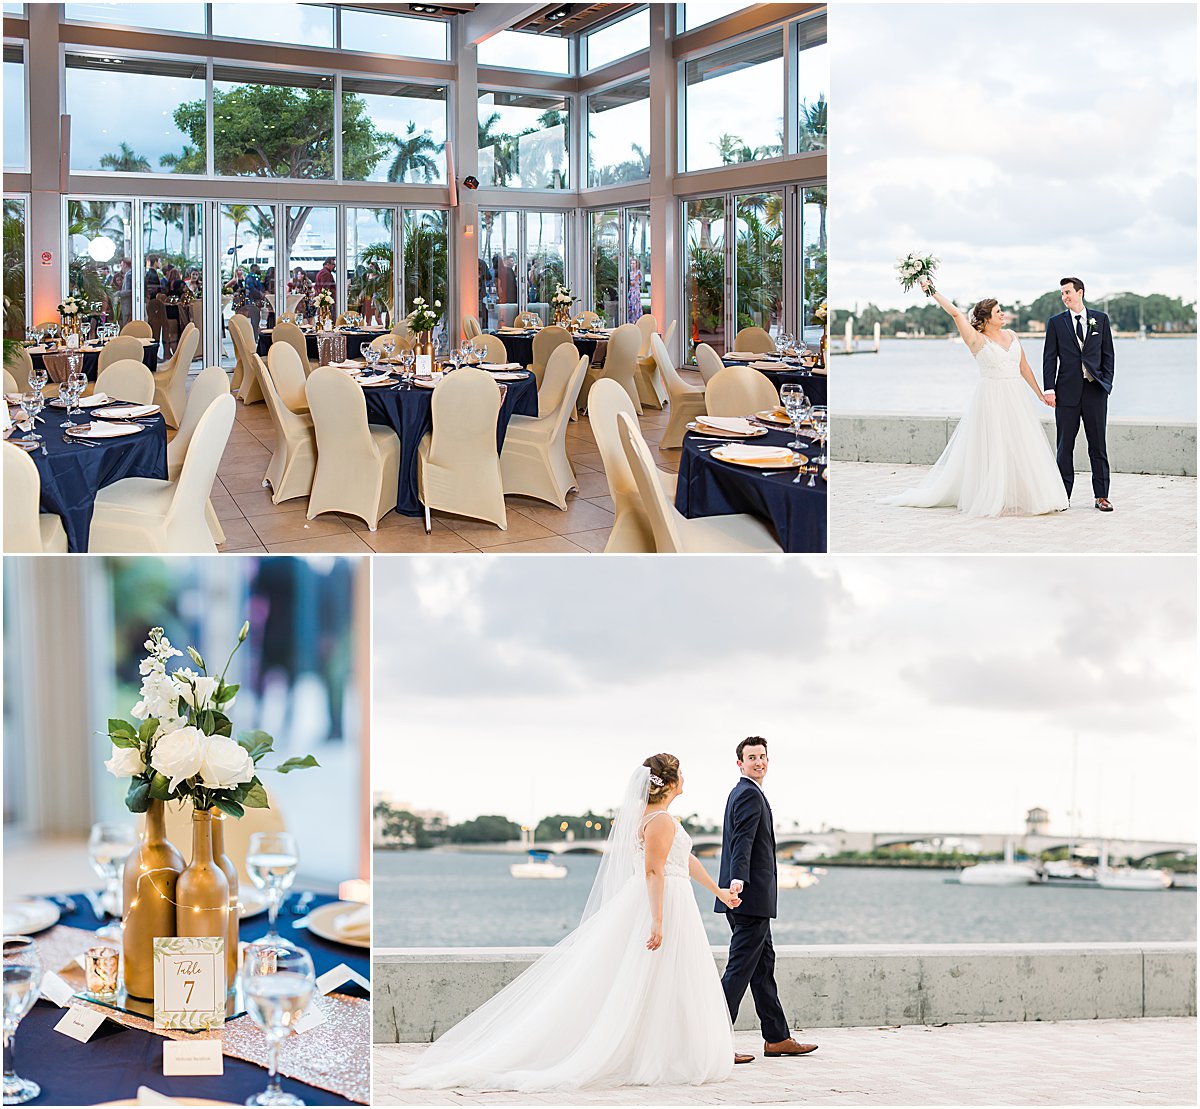 Elegant Blue and White Wedding at West Palm Beach Lake Pavilion | Married in Palm Beach | www.marriedinpalmbeach.com | Blink & Co Photography